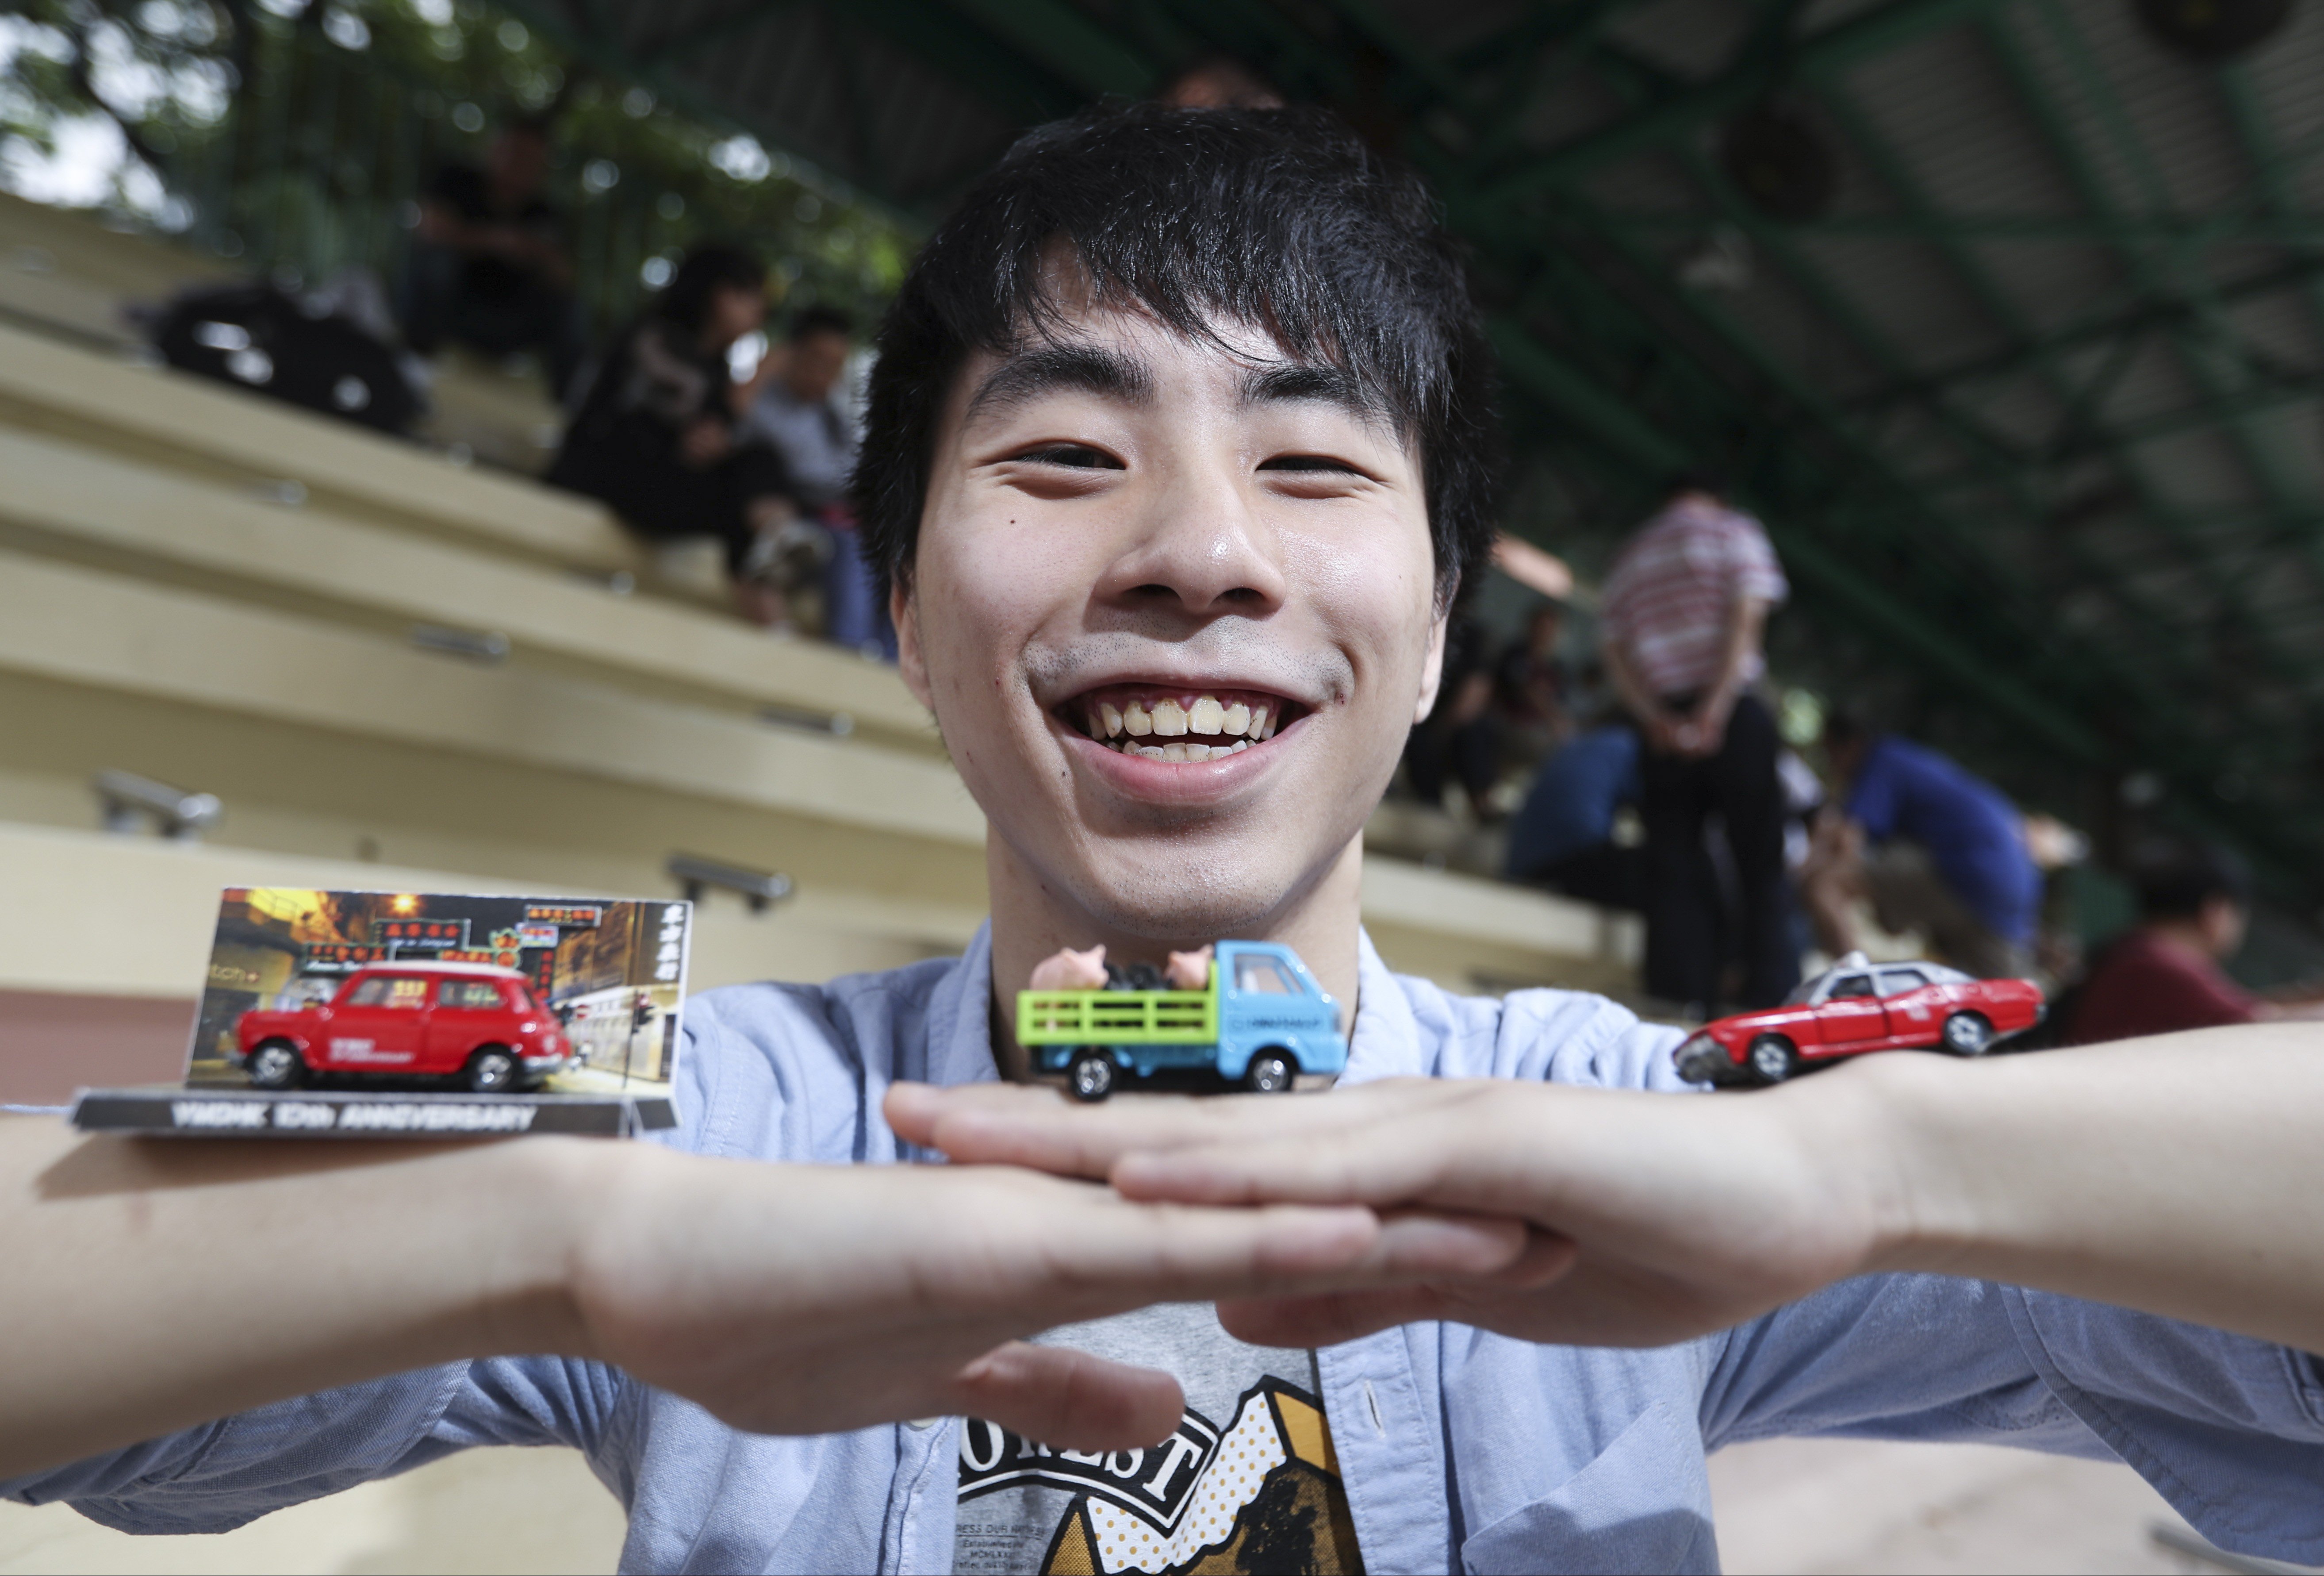 Derek Kwong Siu-fai likes collecting model cars and bought most of them in Tai Yuen Street in Wan Chai. Photo: Nora Tam